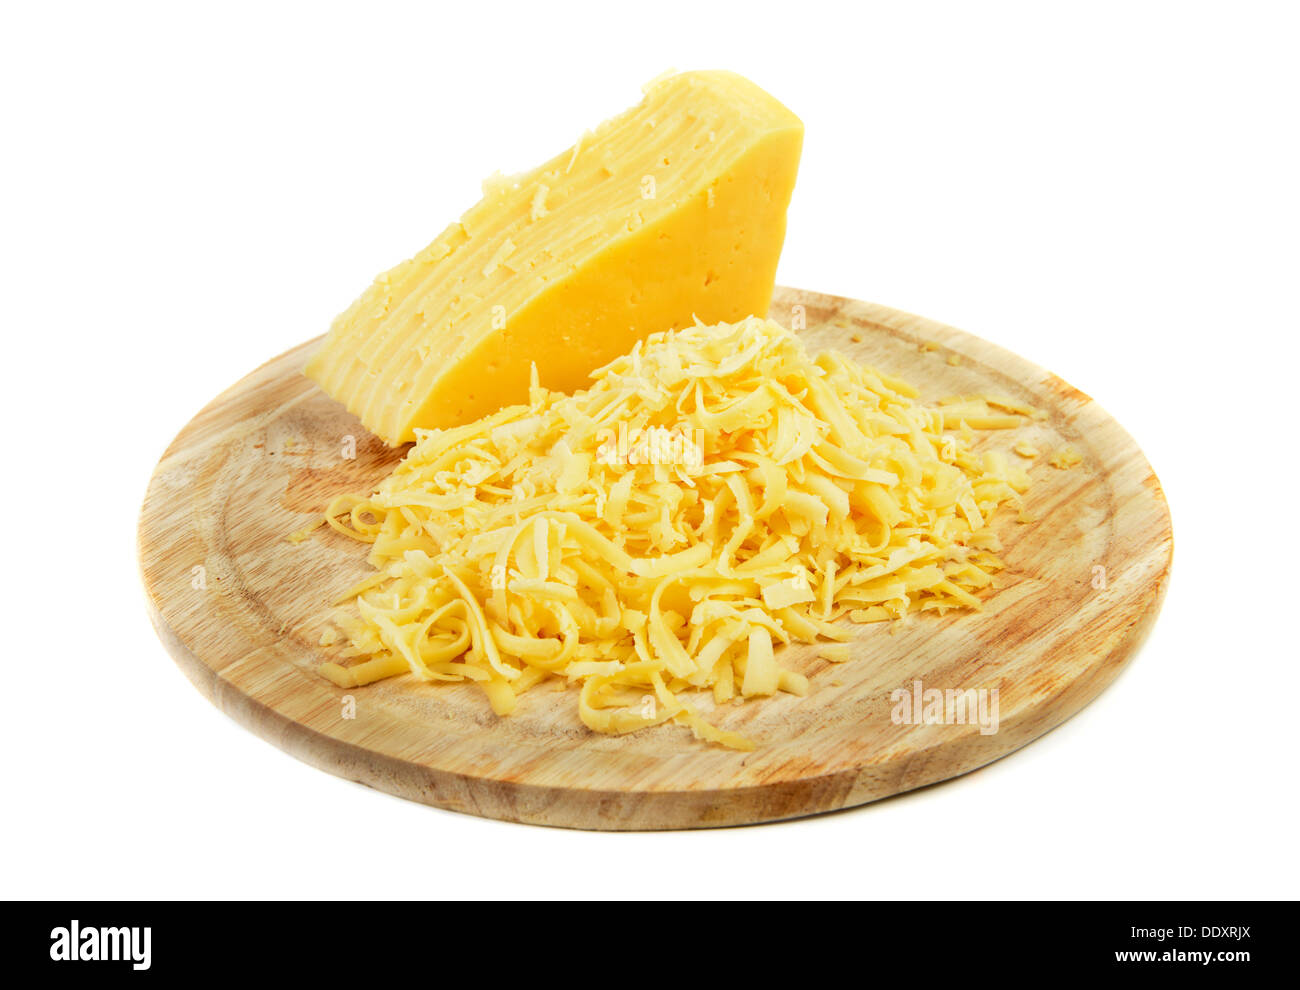 Grated cheese on a cutting board Stock Photo